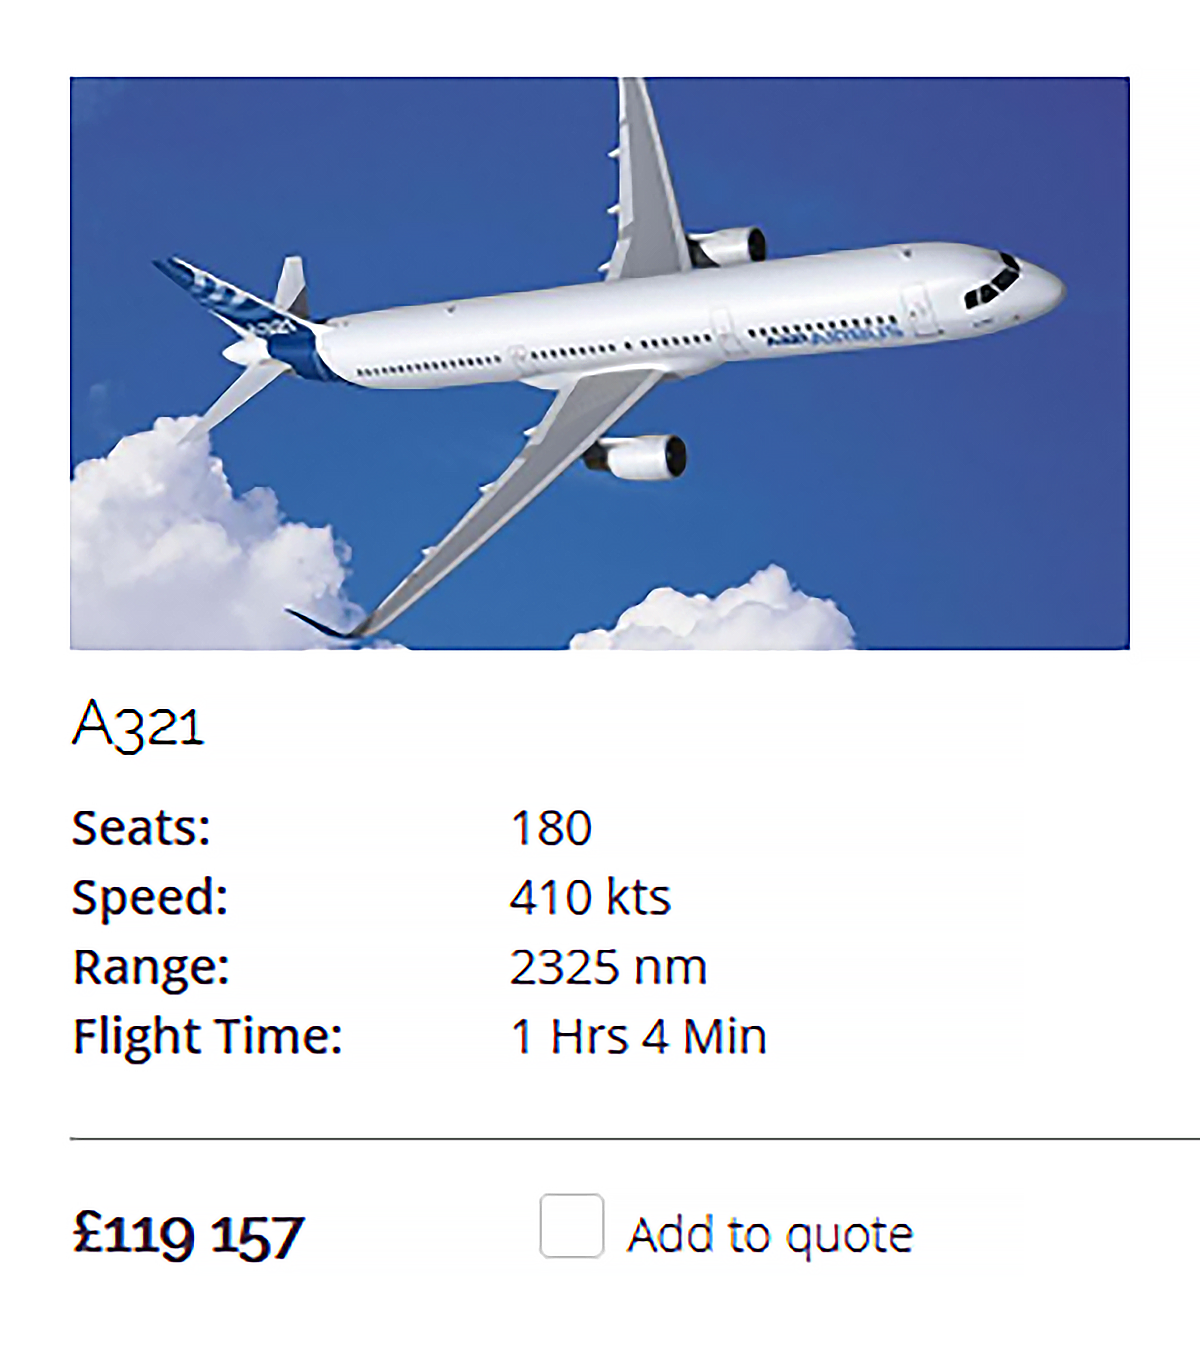 Quote from PrivateFly for an A321 costing £119,157